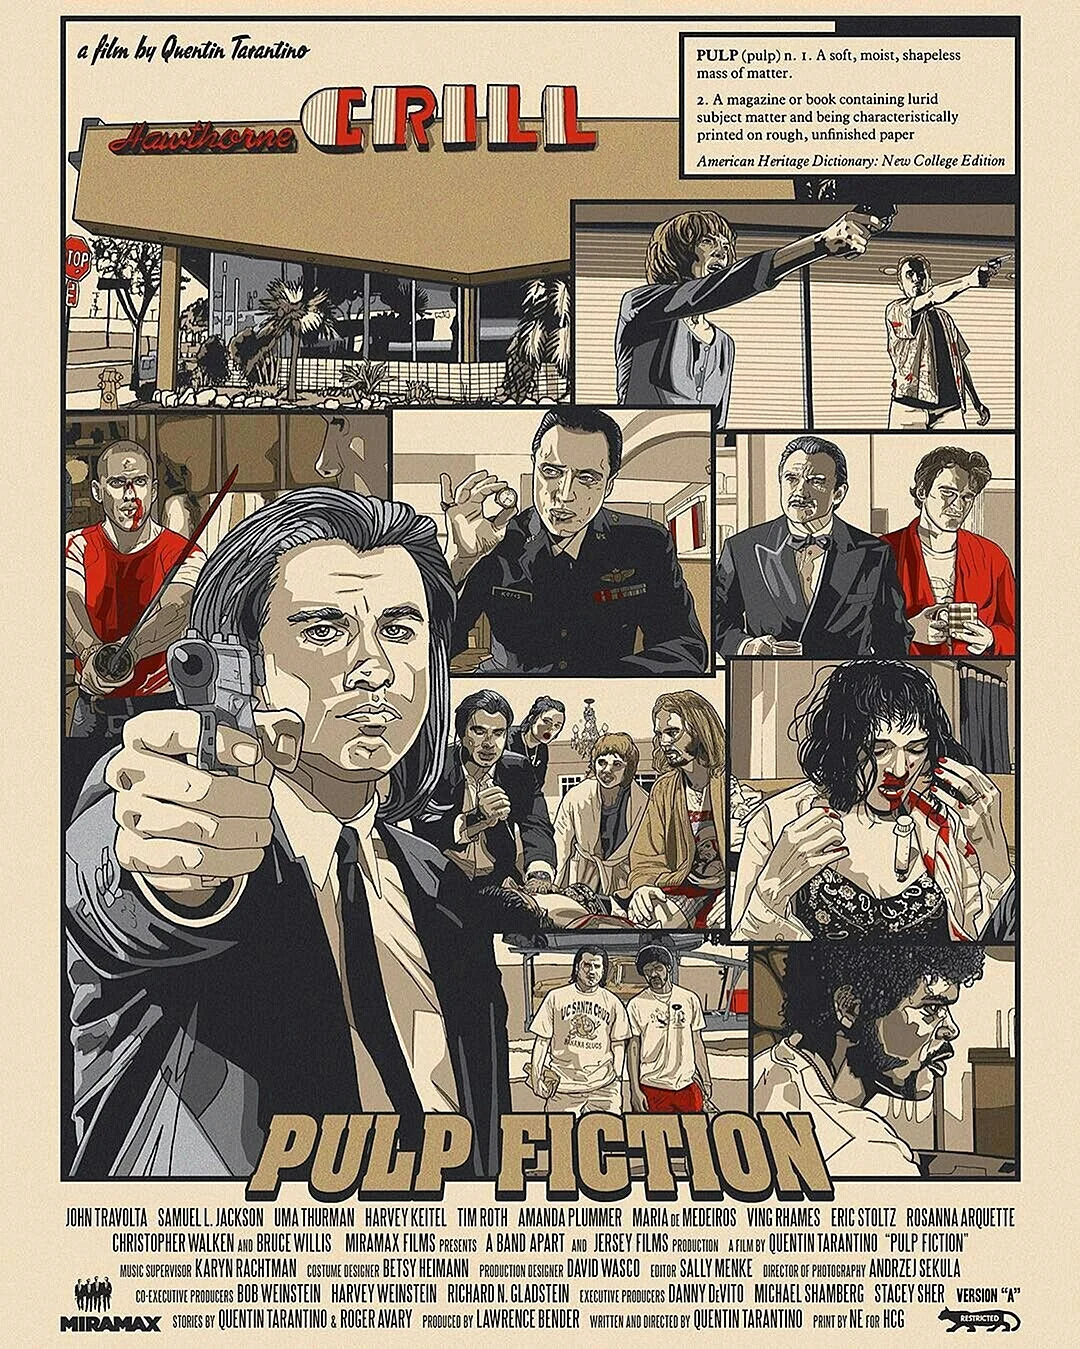 Pulp Fiction Film Poster Wallpaper For iPhone